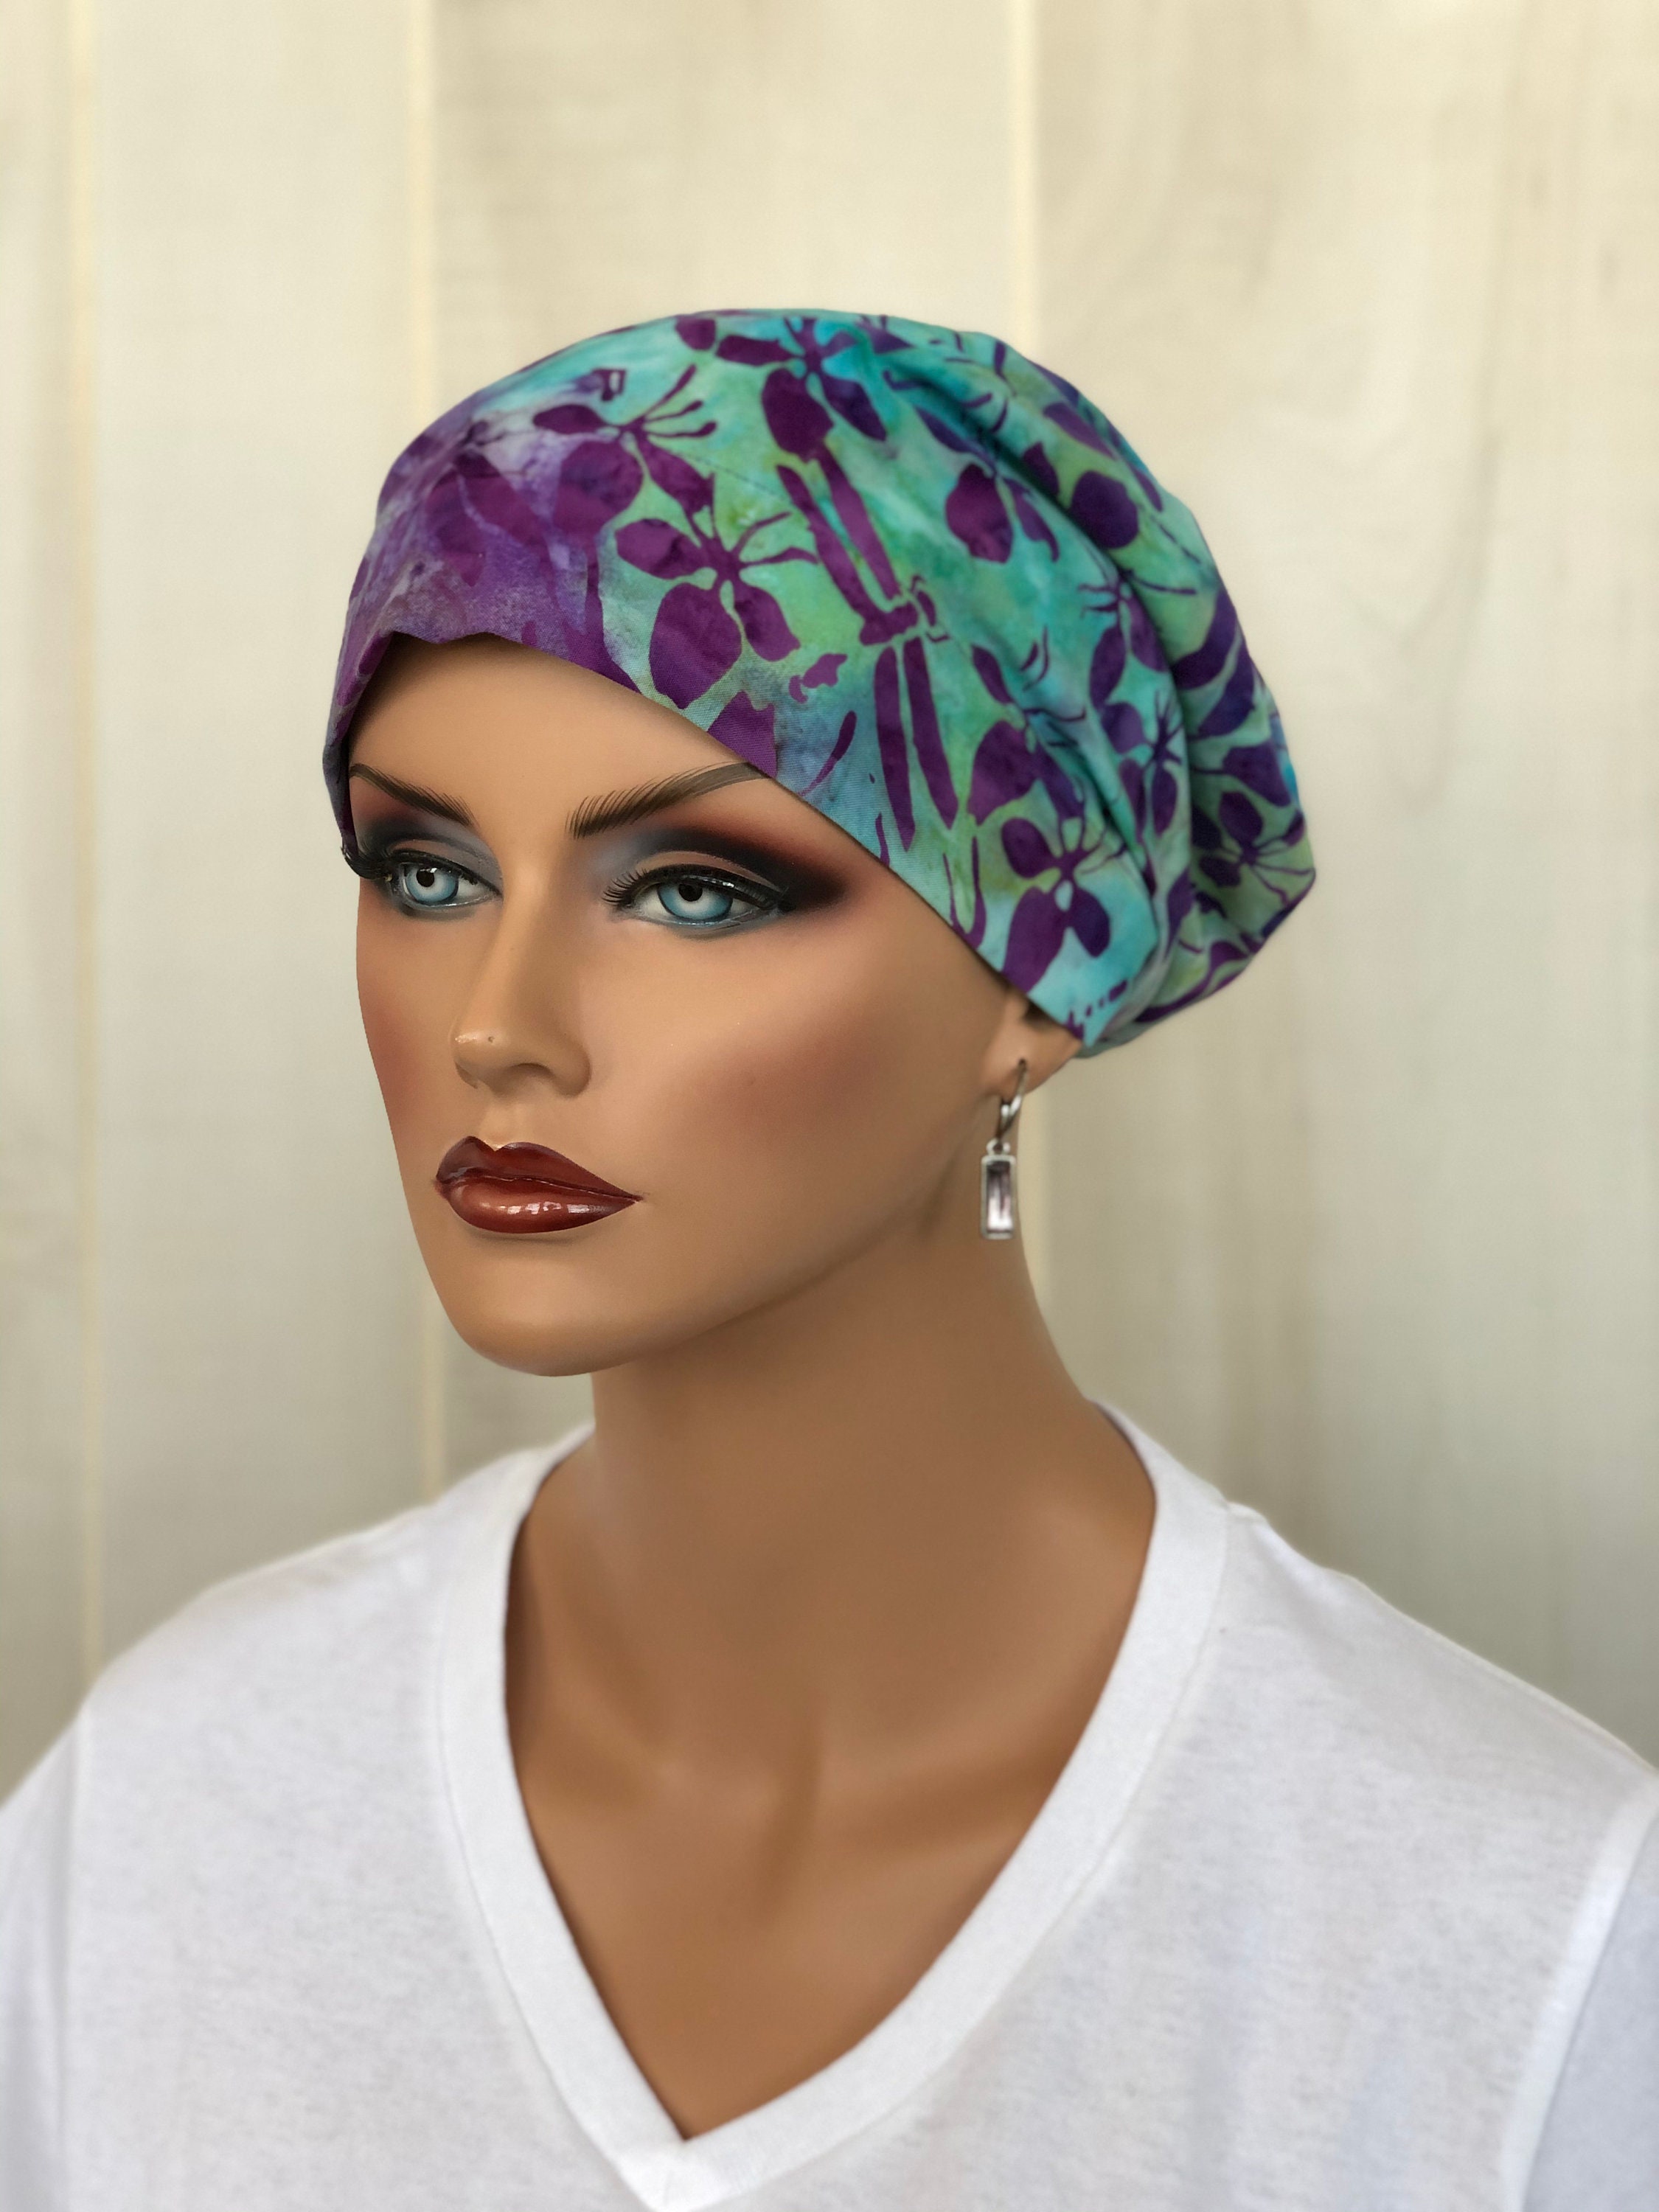 Head Scarf For Women With Hair Loss. Cancer Gifts, Chemo ...